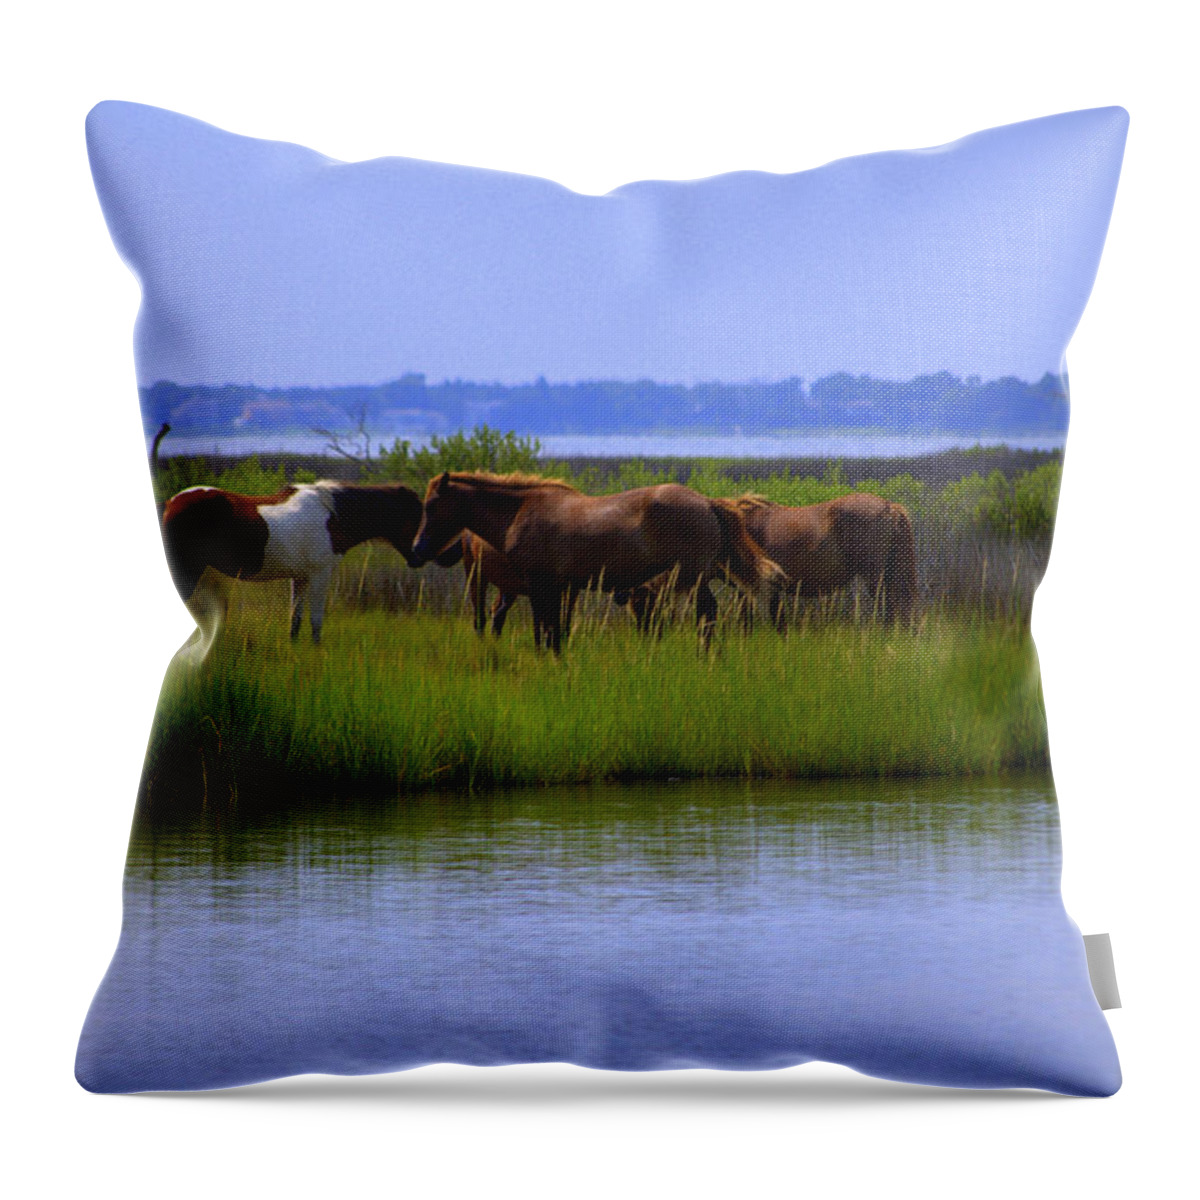 Horse Throw Pillow featuring the photograph Wild Horses Of Assateague Island by Robin Houde Photography